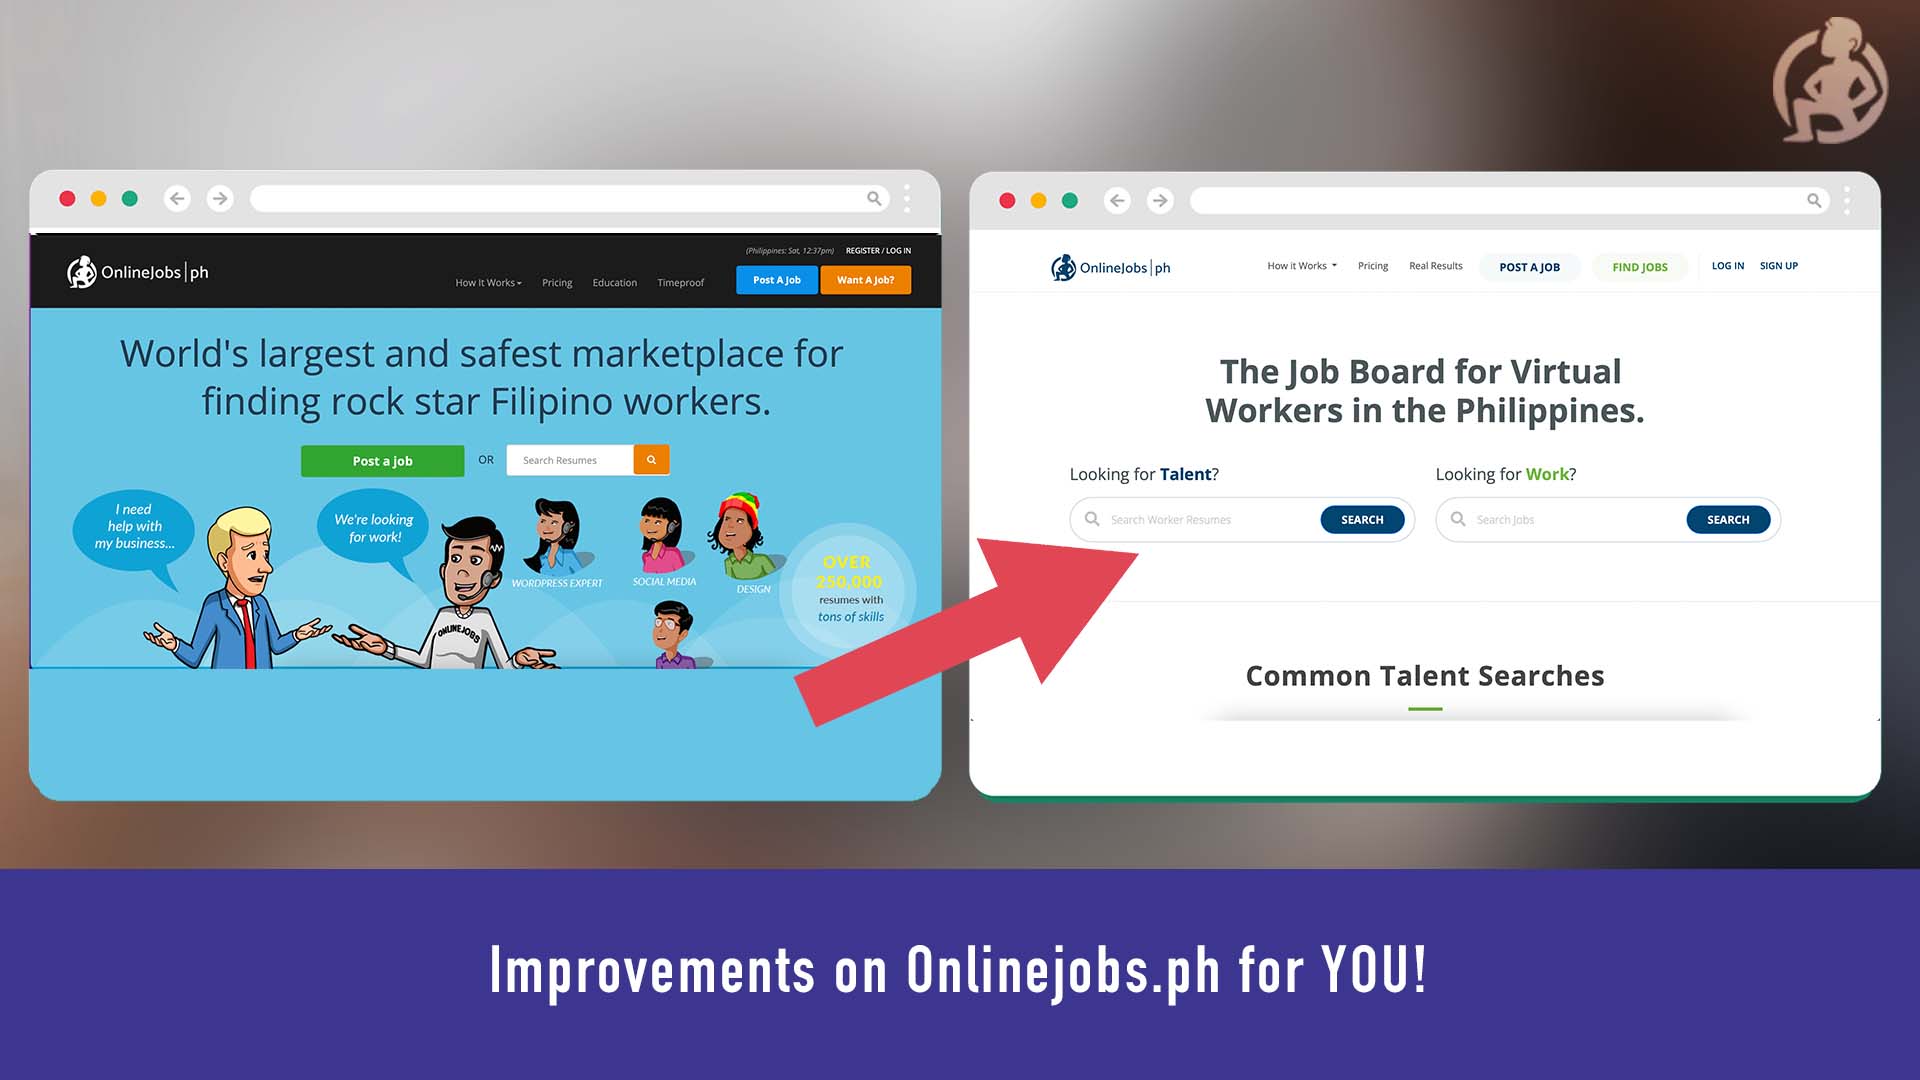 Improvements on Onlinejobs.ph for YOU! Feature